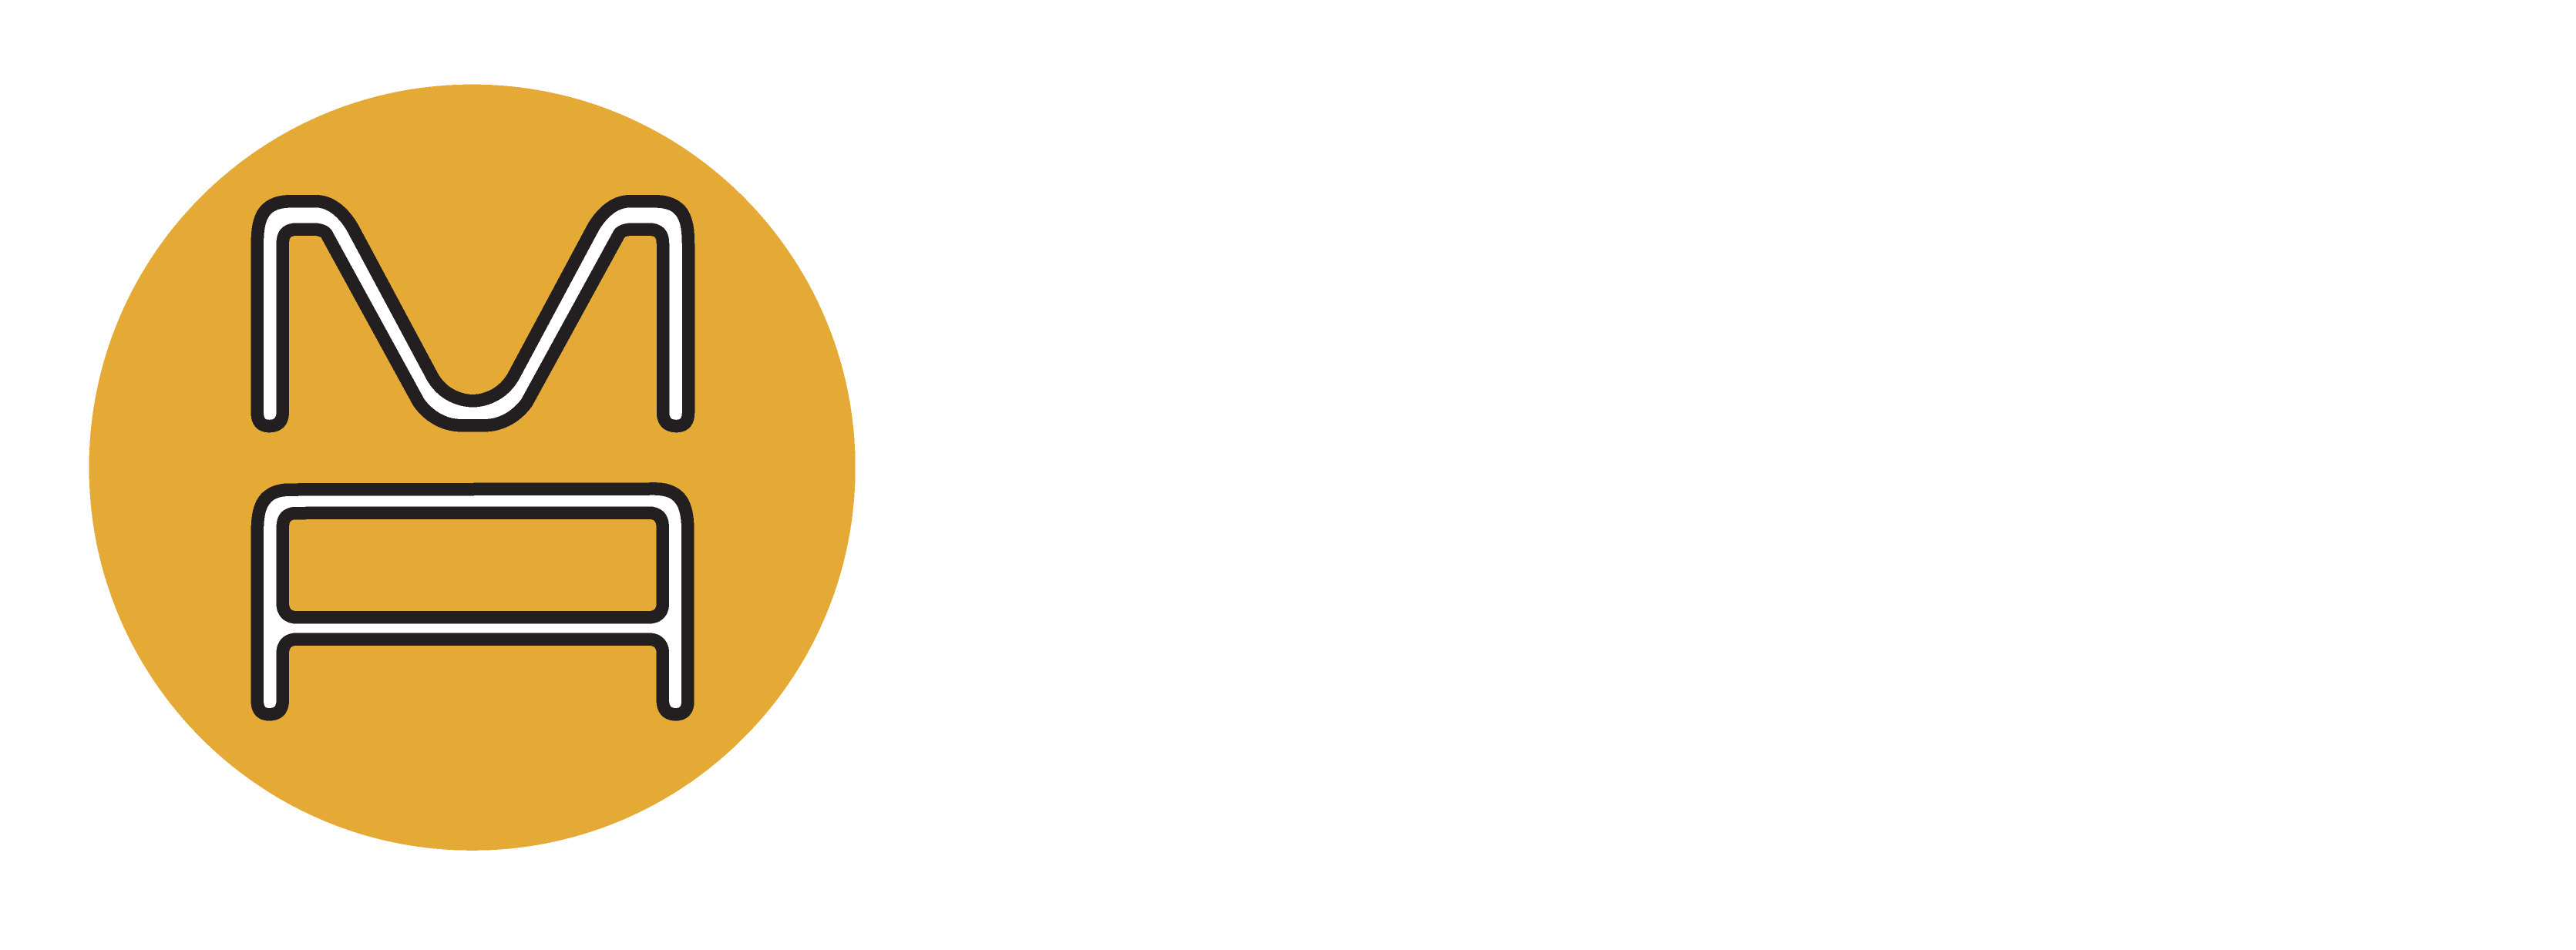 The Mid-America Management Corporation